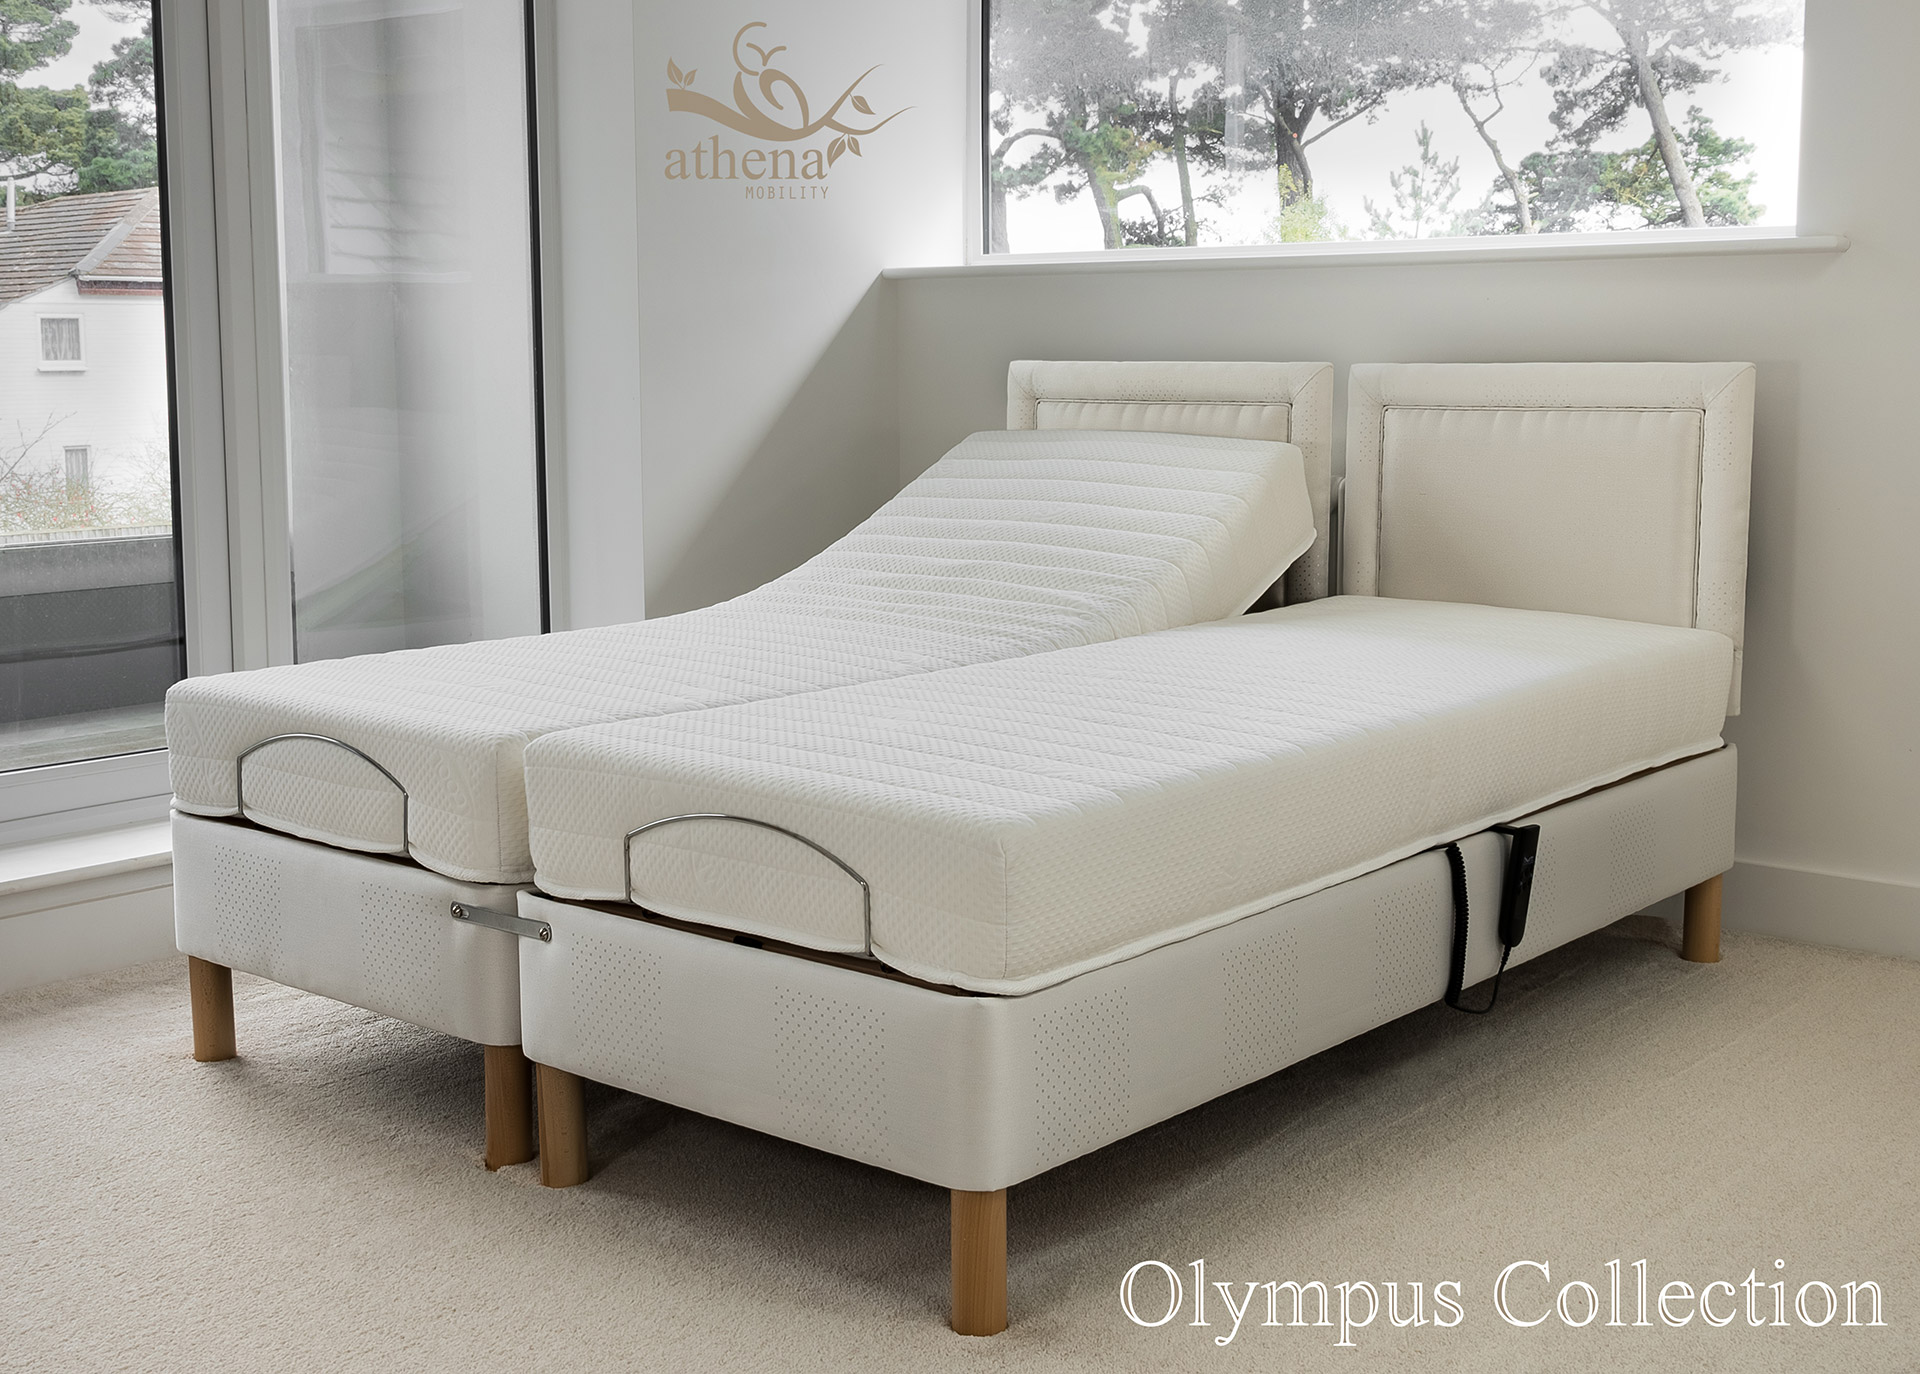 Athena Mobility | Olympus Bed Collection